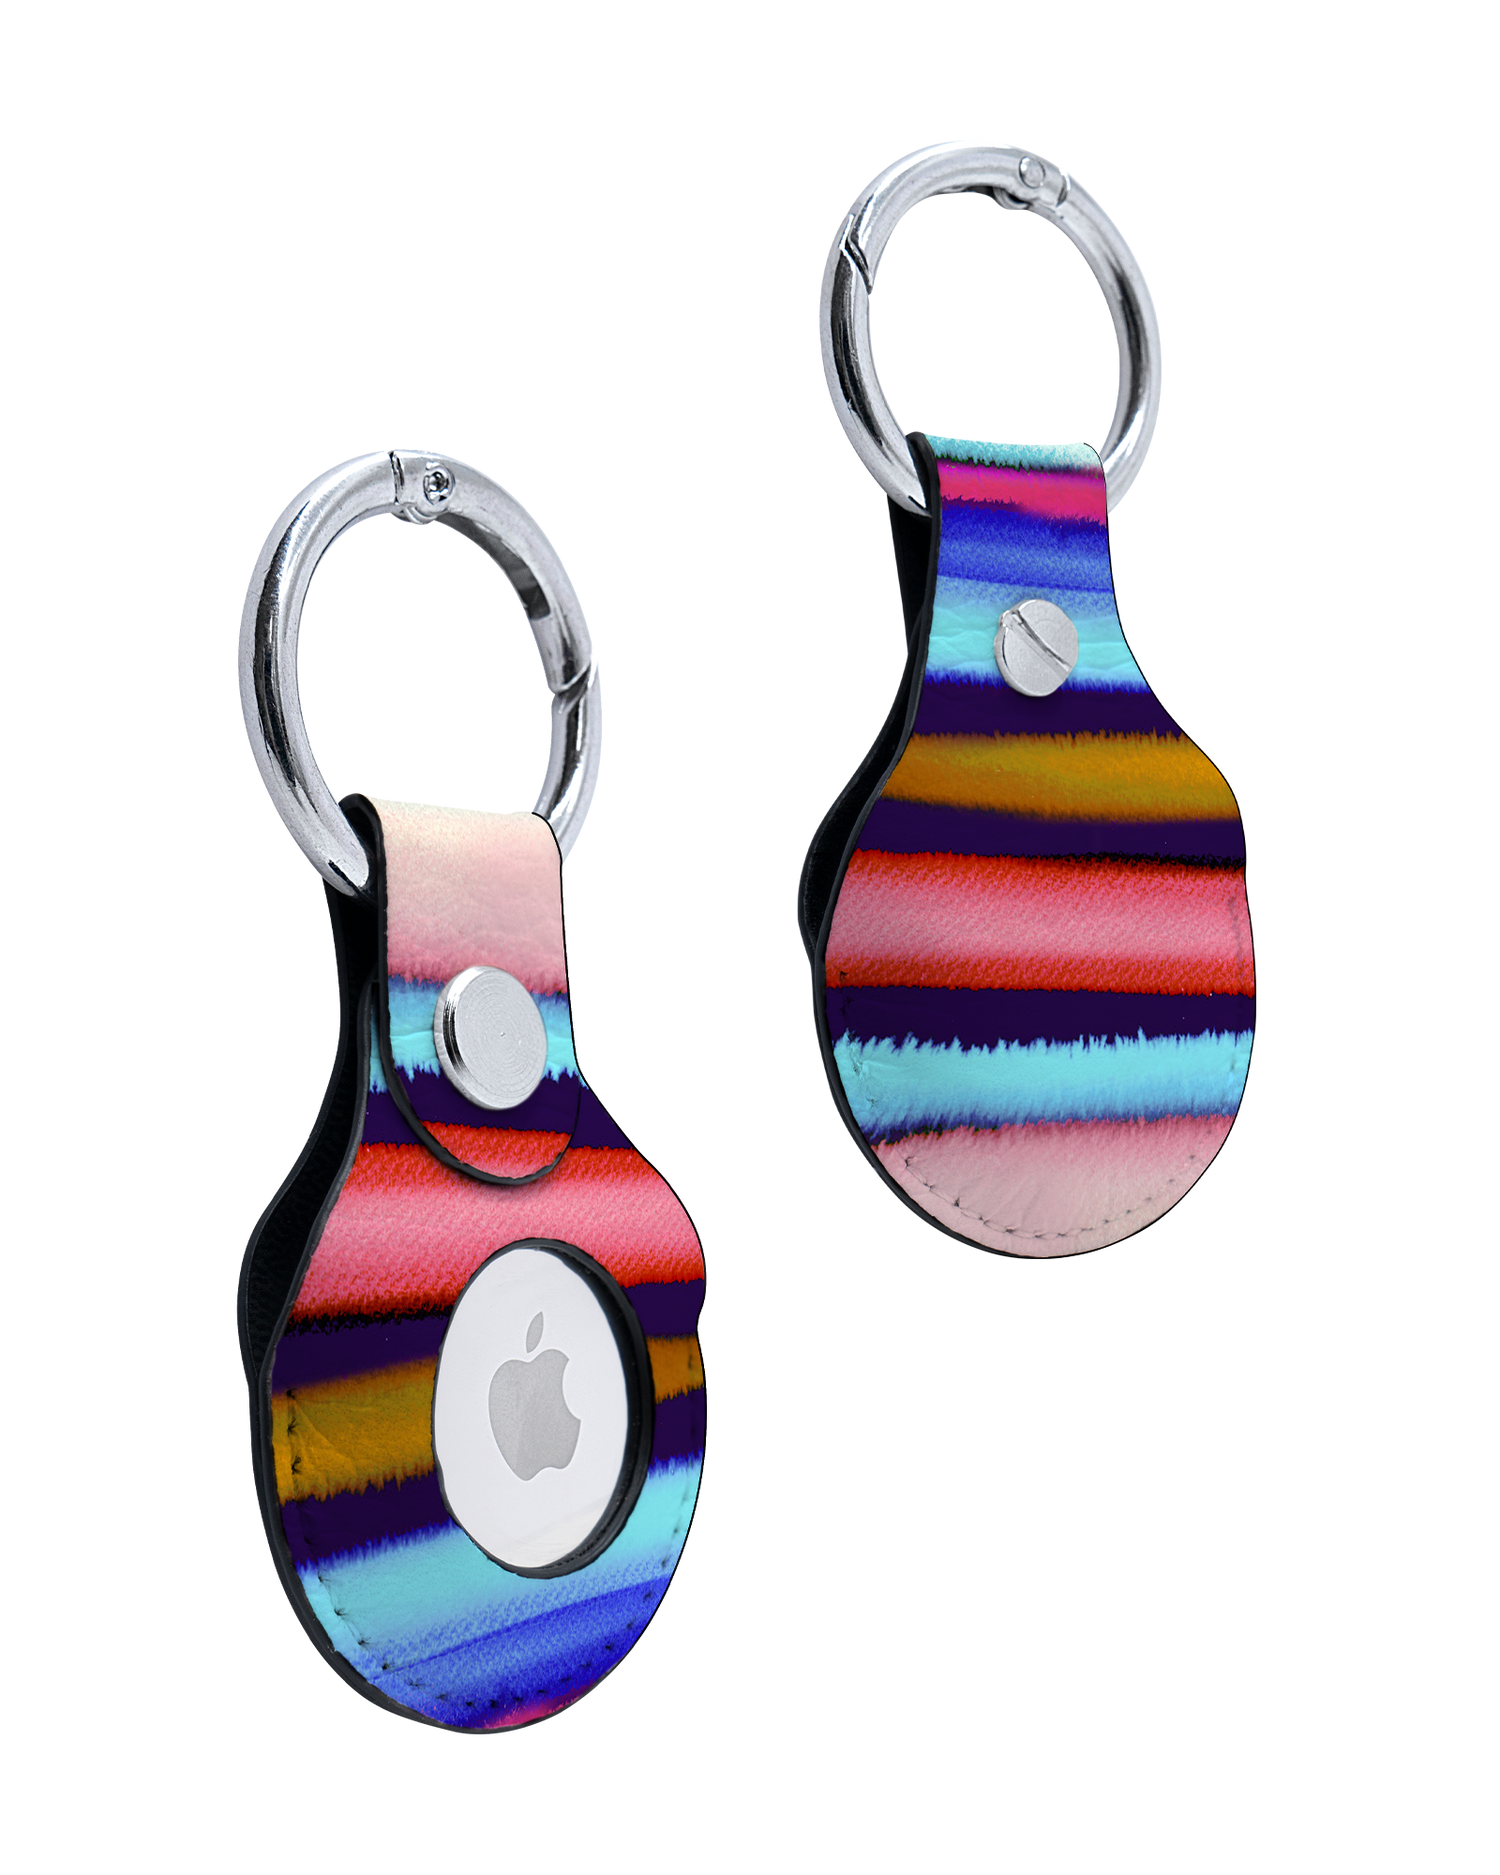 AirTag Holder with Watercolor Stripes Design: Front and Back